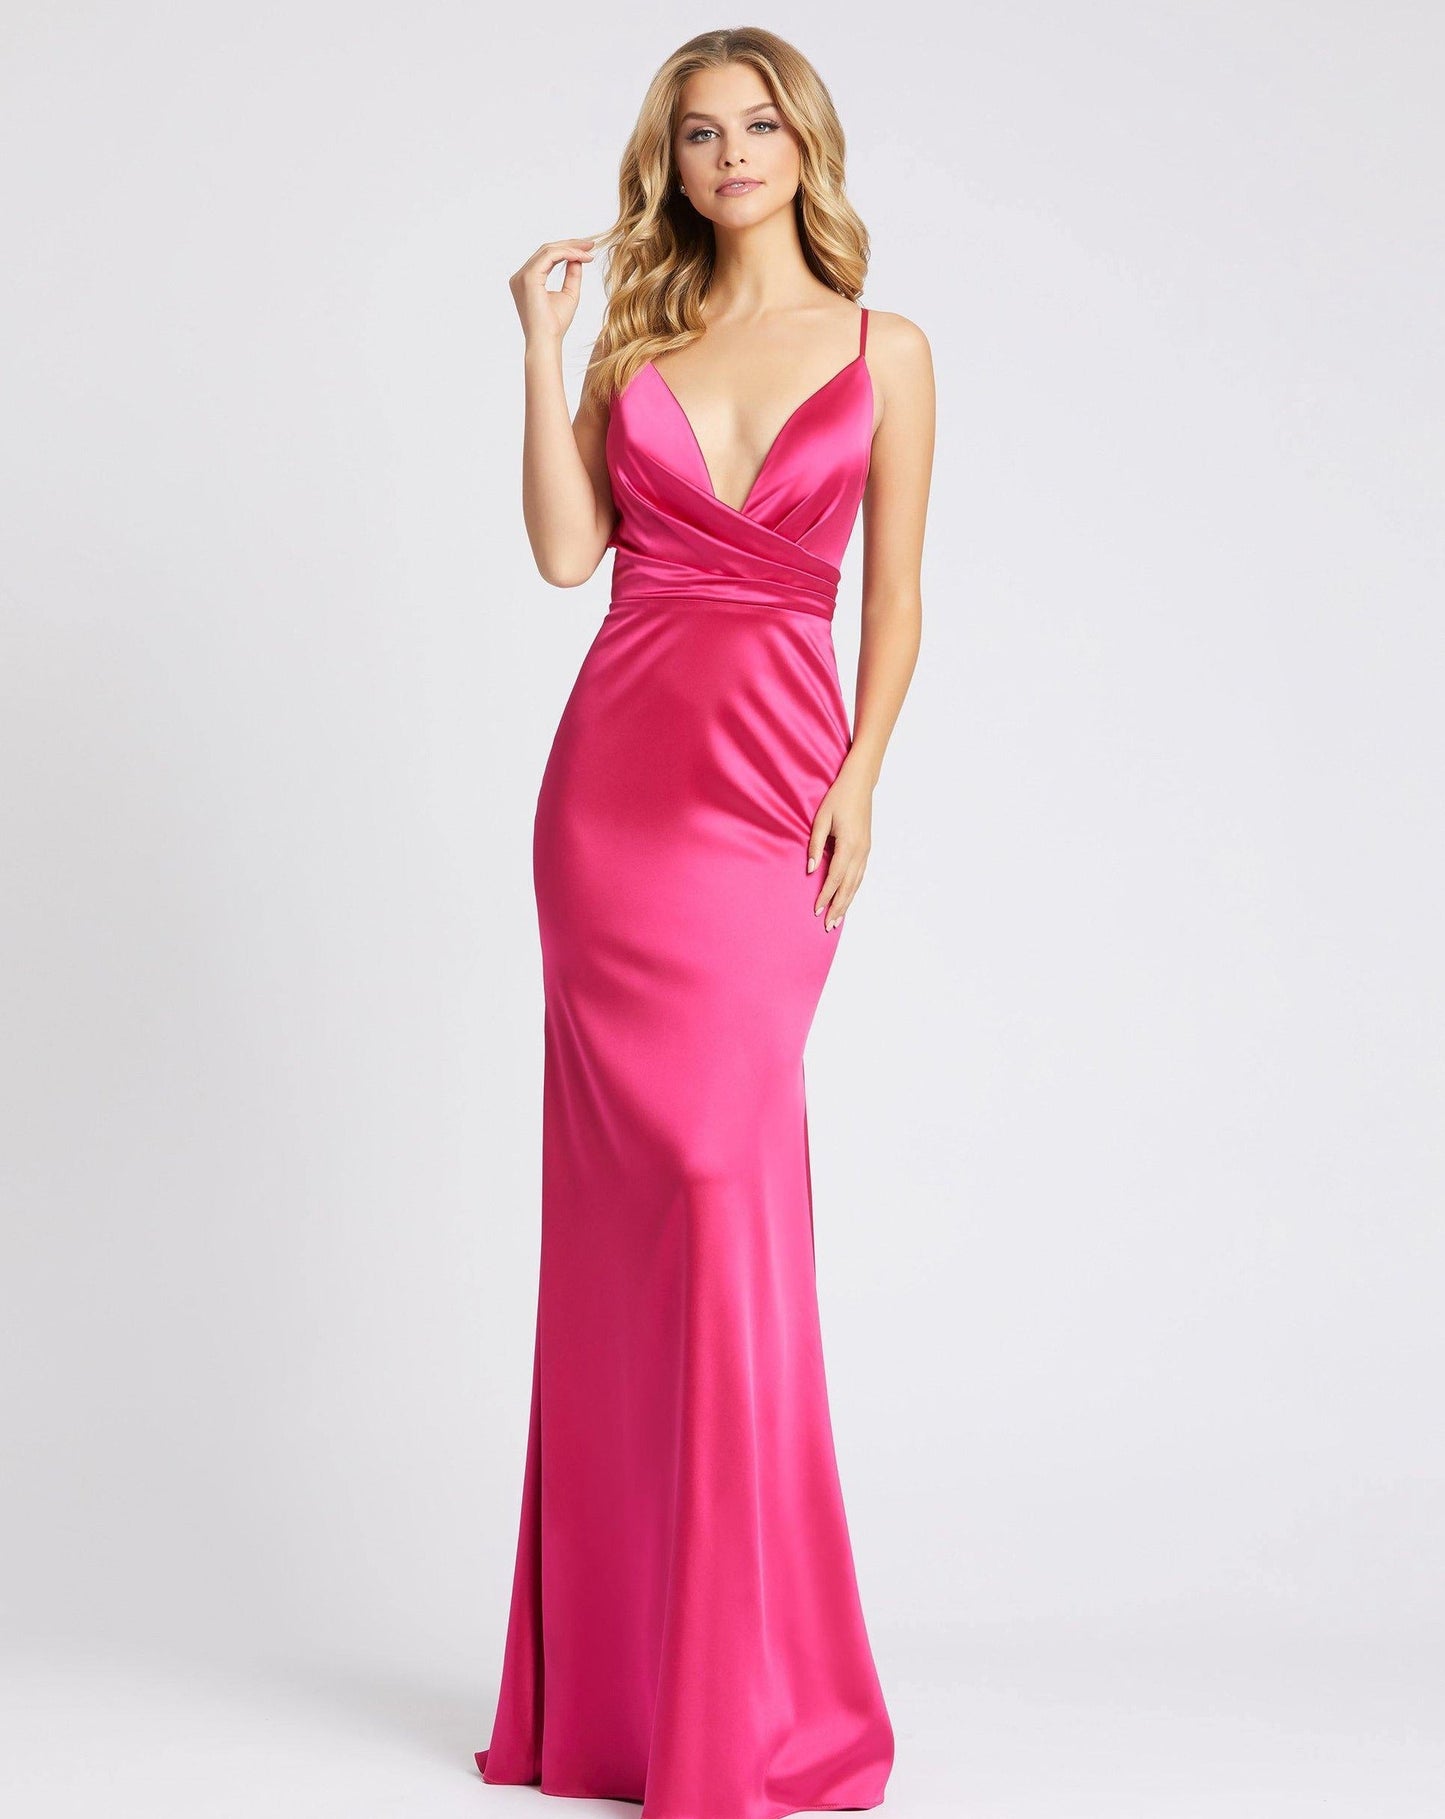 Mac Duggal Prom Spaghetti Strap Long Dress 26264 - The Dress Outlet